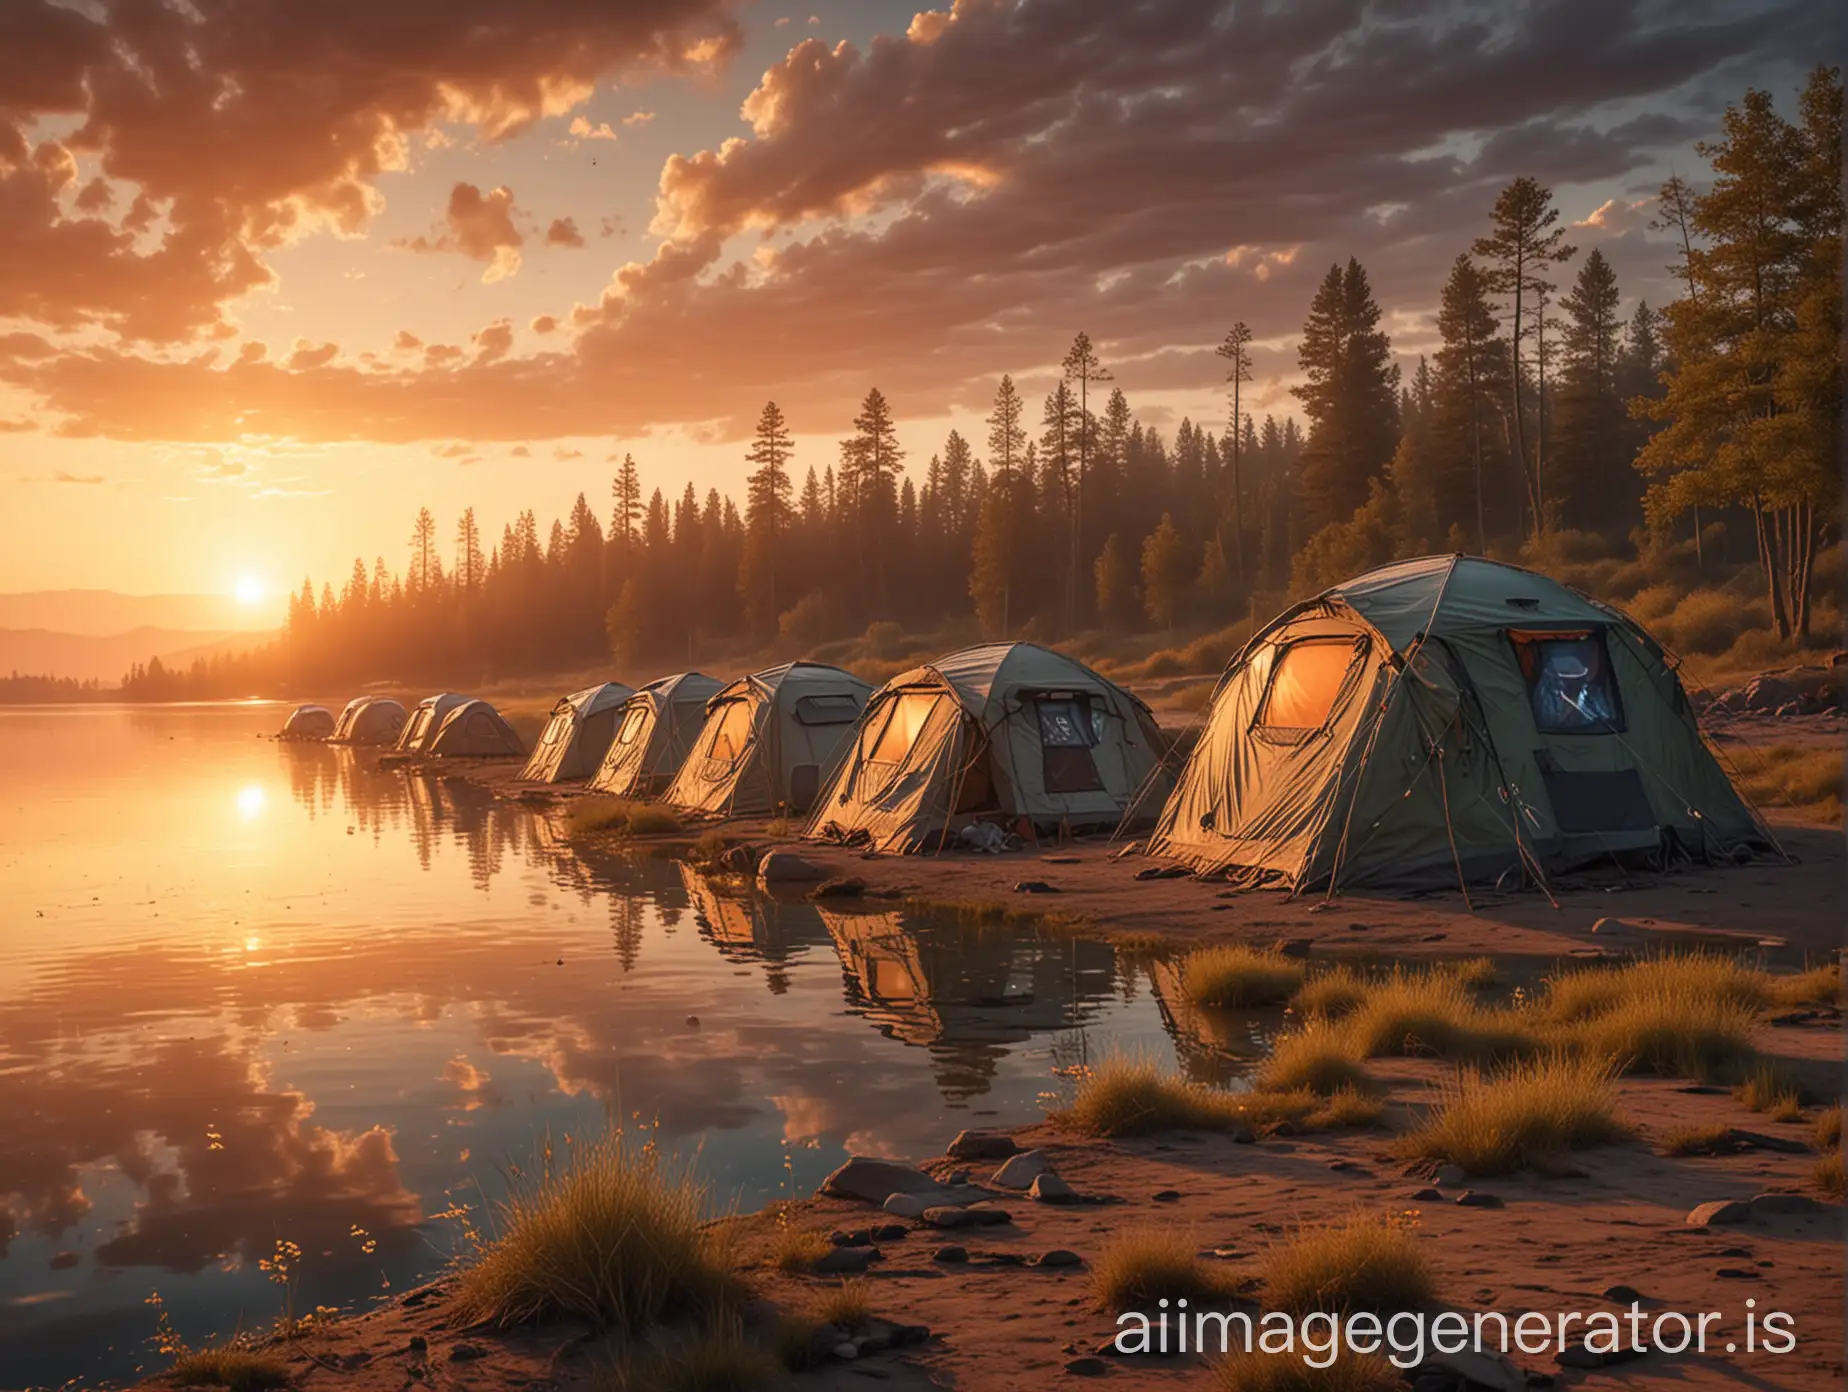 Alien-Invasion-Robots-Camping-by-the-Lake-at-Sunset